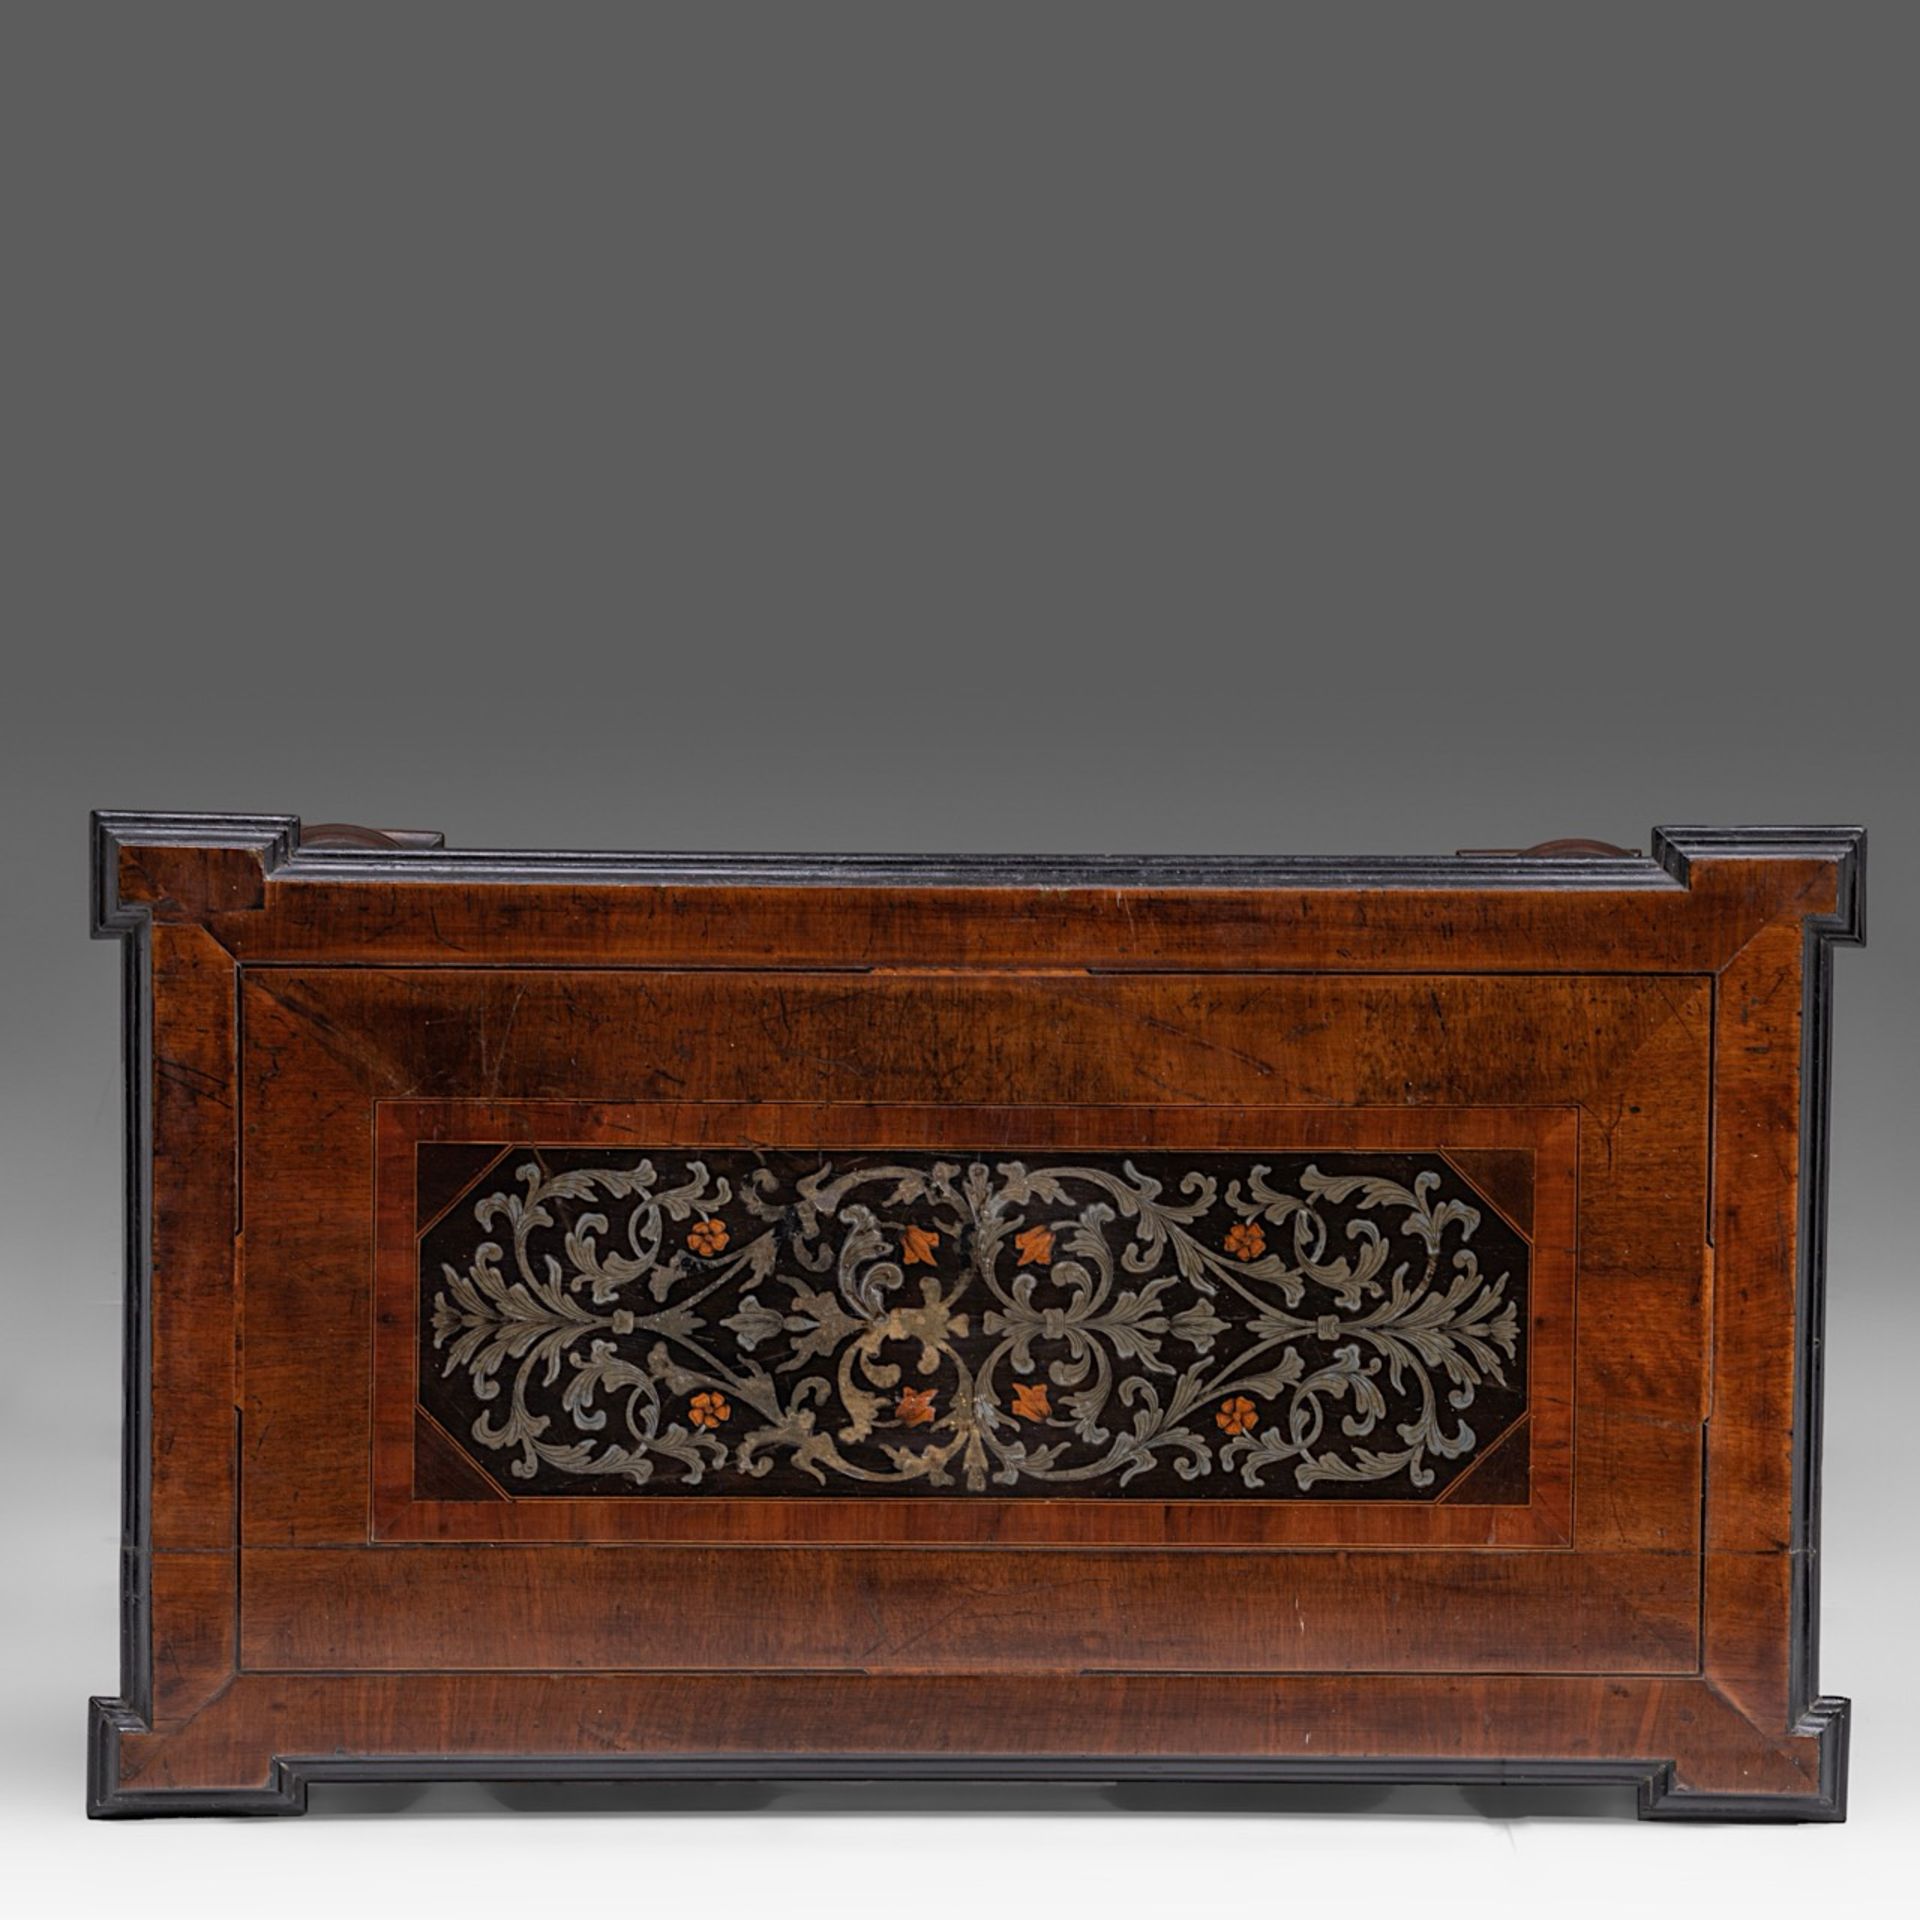 A fine Baroque rosewood and mahogany veneered centre table, 17thC, H 80 - W 105 - D 60 cm - Image 6 of 7